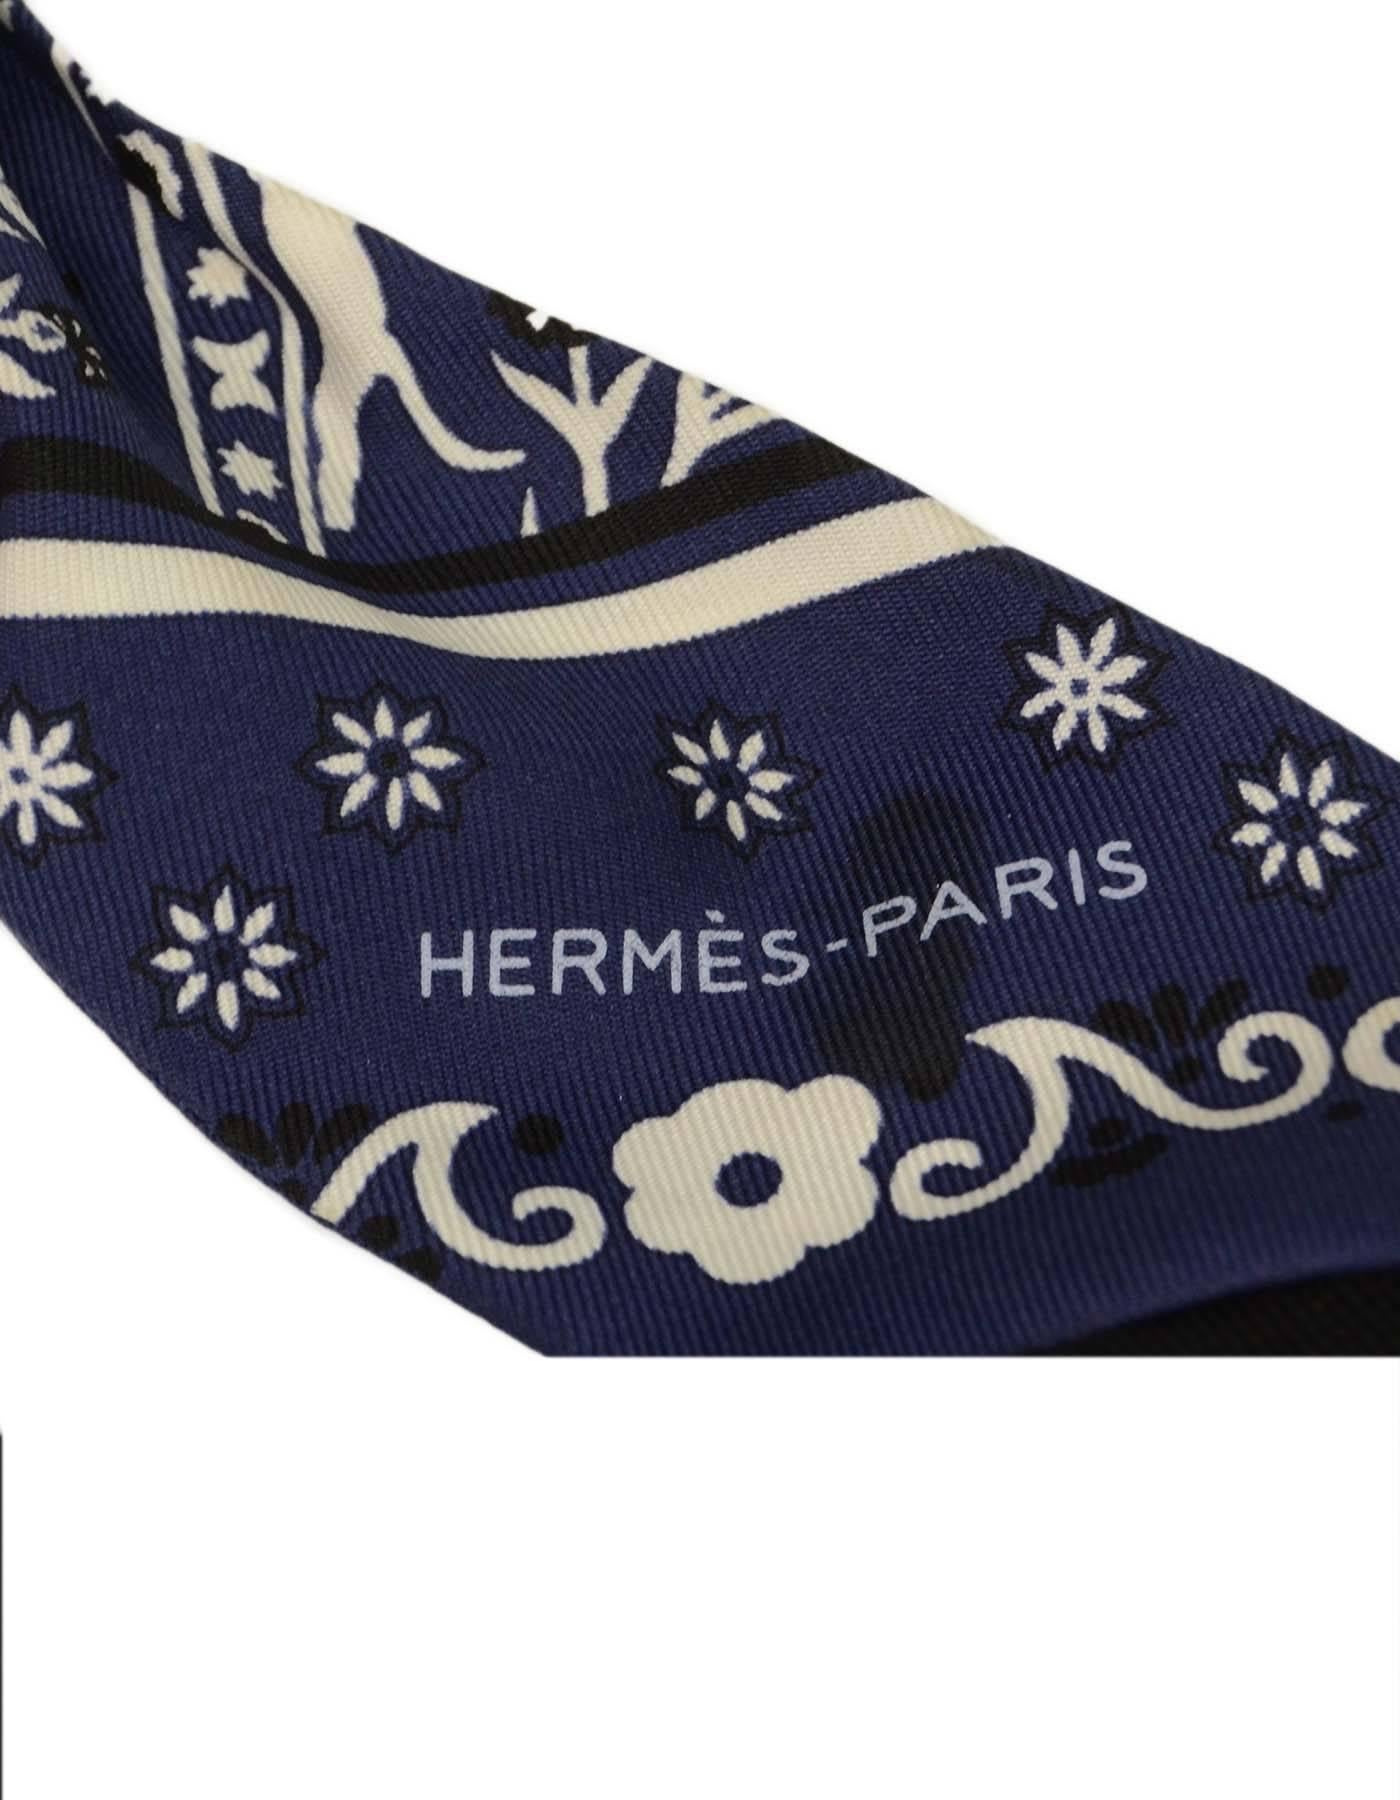 Hermes Navy Paisley Silk Print Twilly Scarf
Features paisley and horse combo print
Made In: France
Color: Navy, white, black
Composition: 100% Silk 
Overall Condition: Excellent pre-owned condition, with exception of light soiling on white